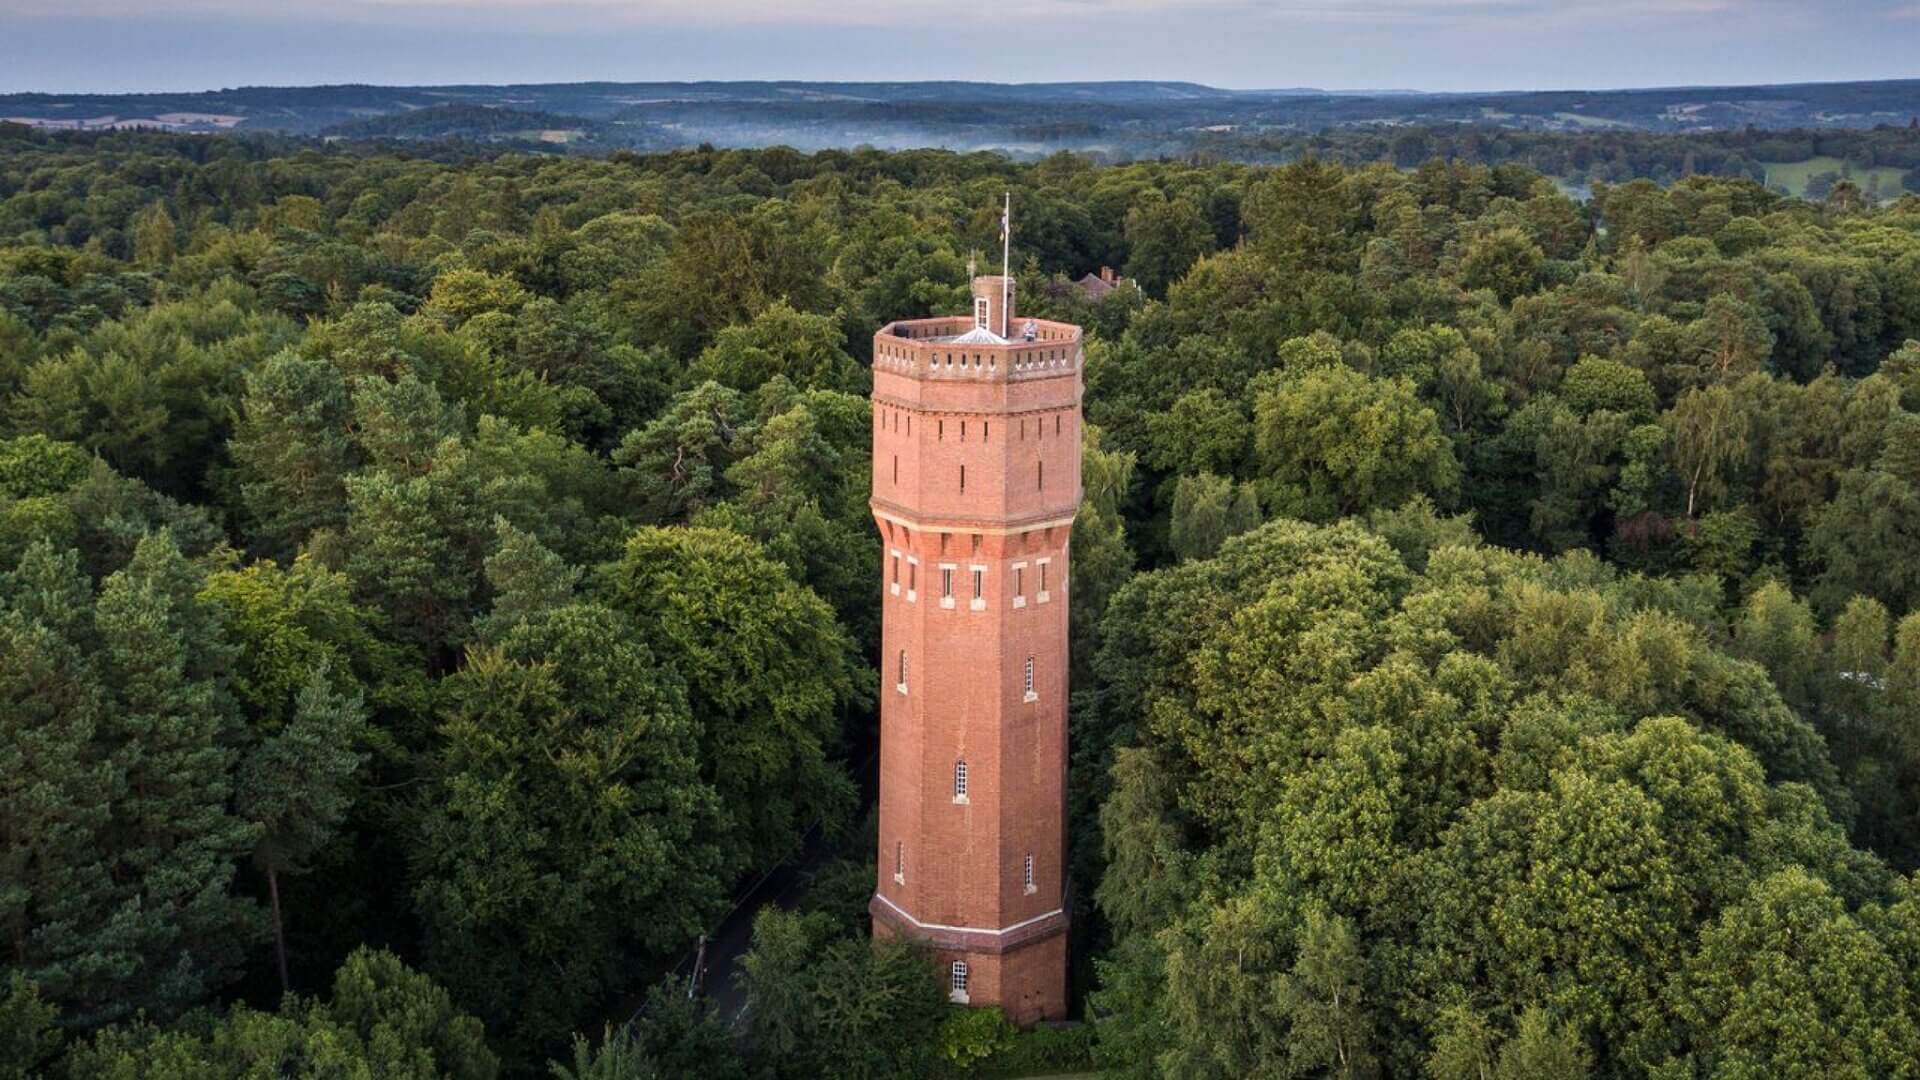 The Munstead Water Tower is a fascinating architectural structure.